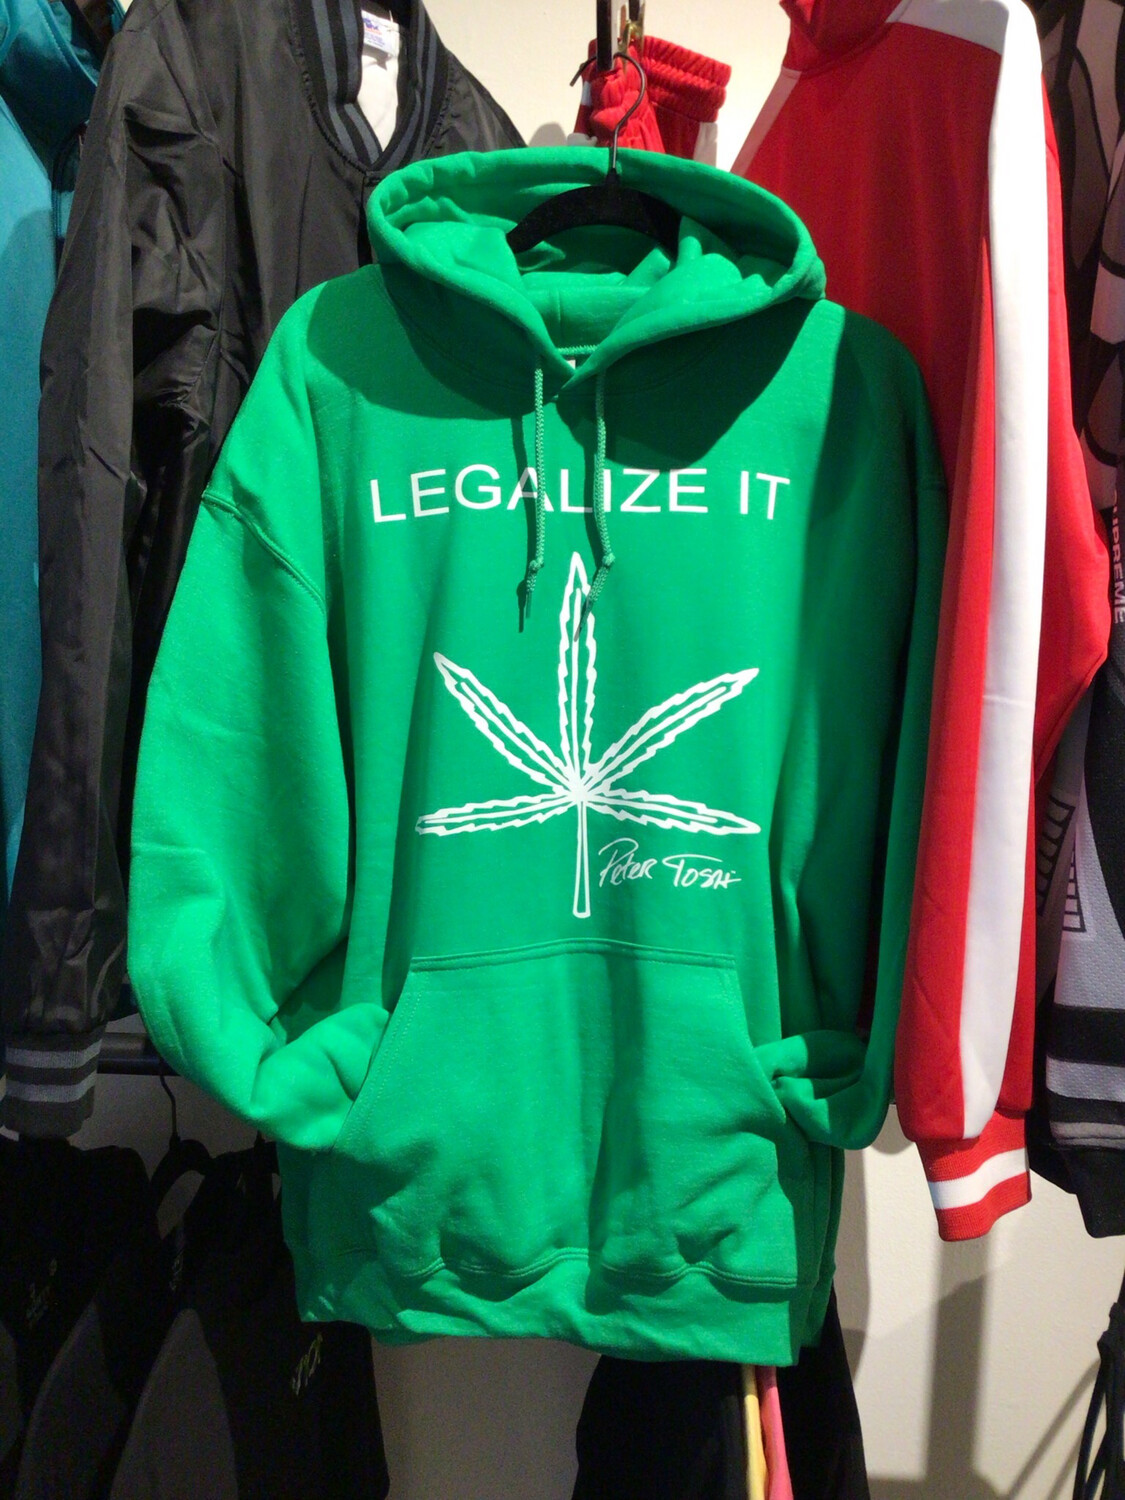 Peter T - “LEGALIZE IT” Hoody M